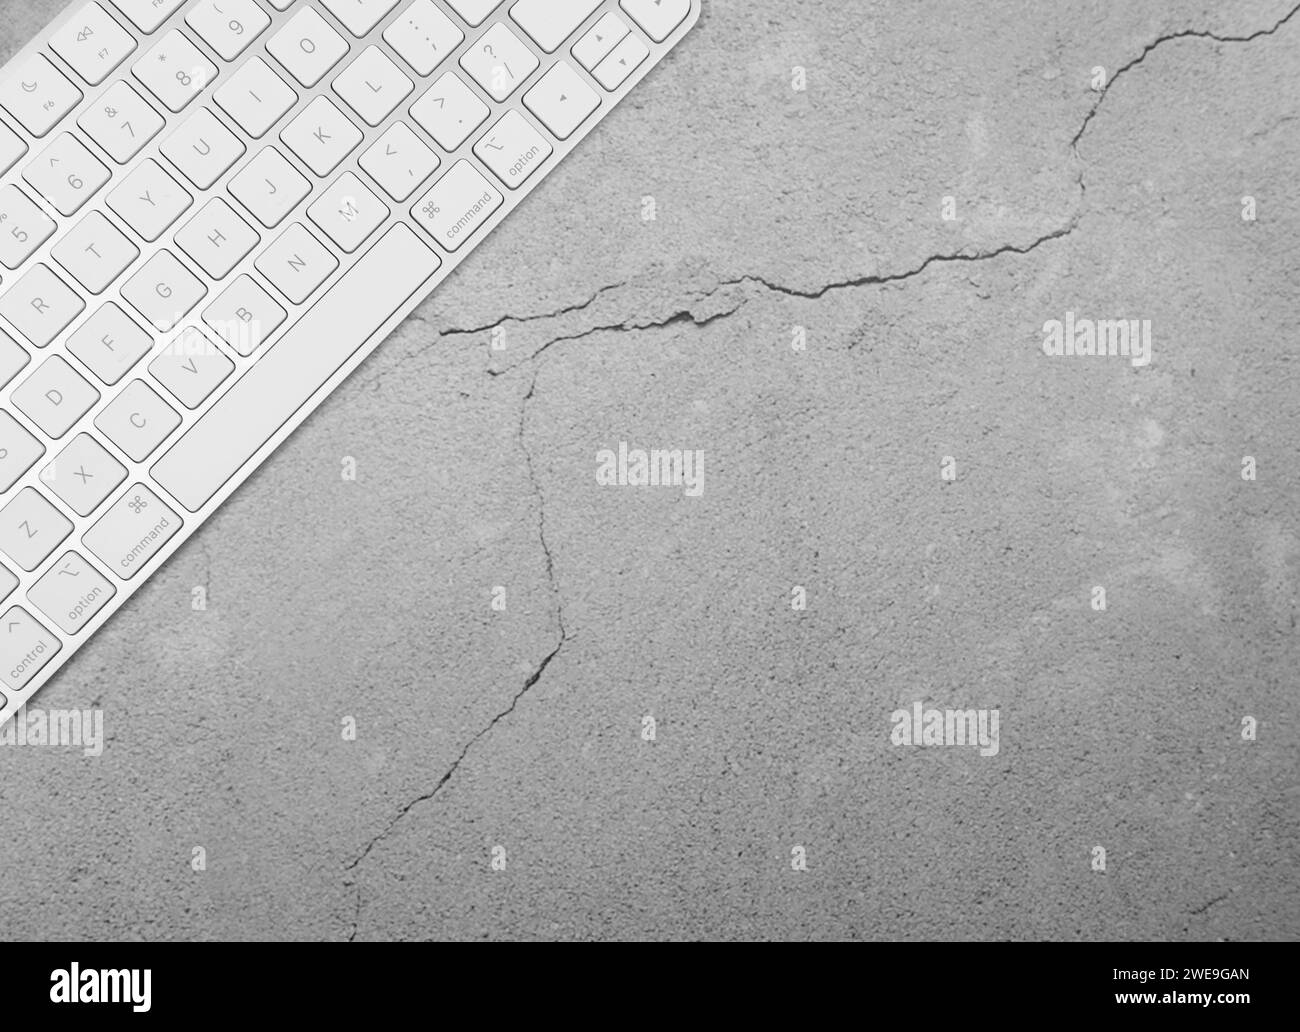 Top view of white keyboard on concrete background. Modern office flat lay, copy space. Stock Photo